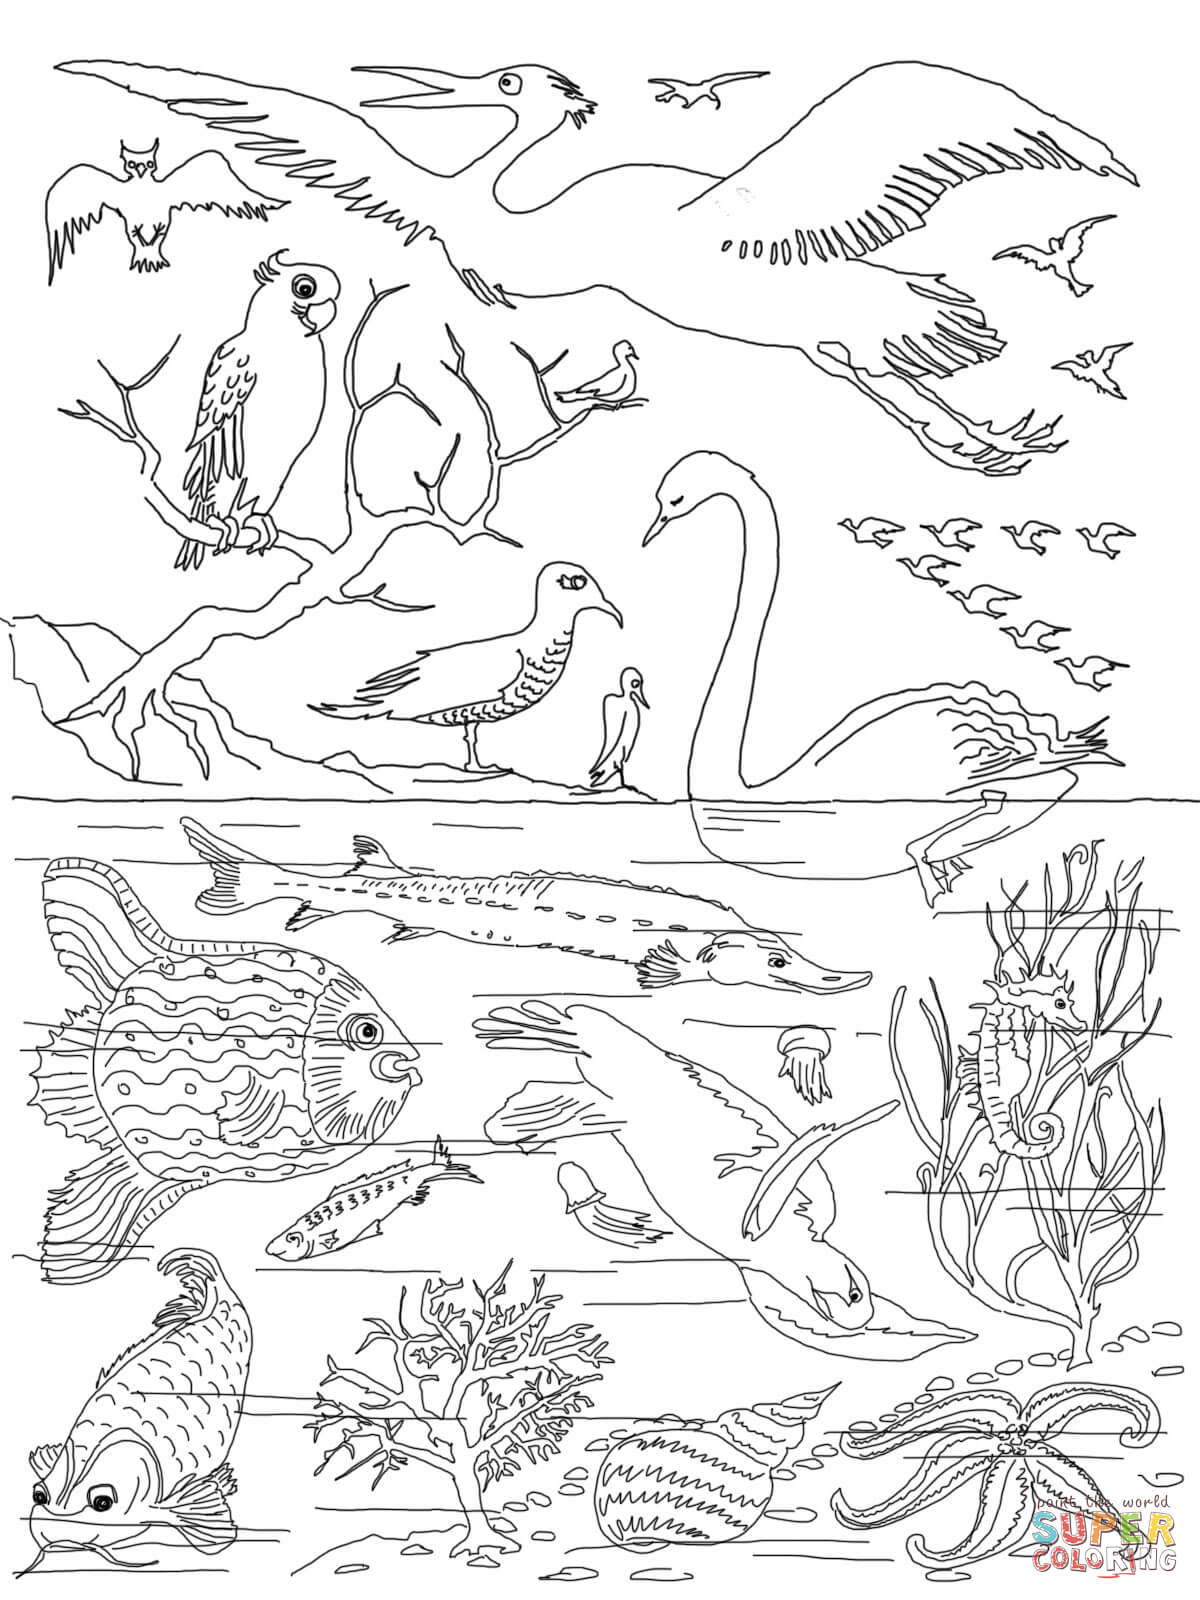 Story Coloring Pages 5th Day Of Creation Coloring Page Free Printable Coloring Pages